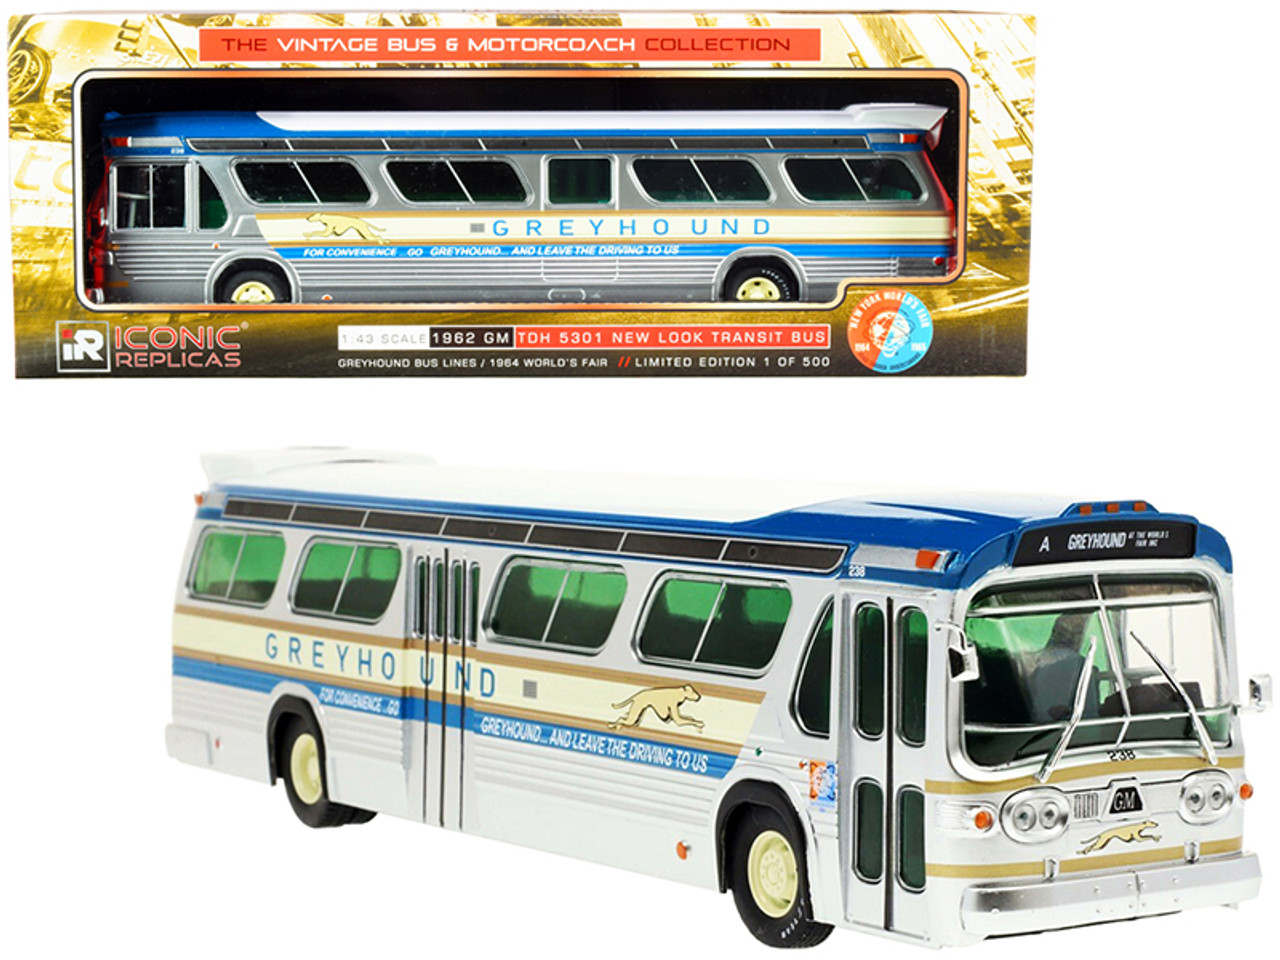 1962 GM TDH 5301 New Look Transit Bus Greyhound Bus Lines "1964 World's Fair" "The Vintage Bus & Motorcoach Collection" Limited Edition to 500 pieces Worldwide 1/43 Diecast Model by Iconic Replicas